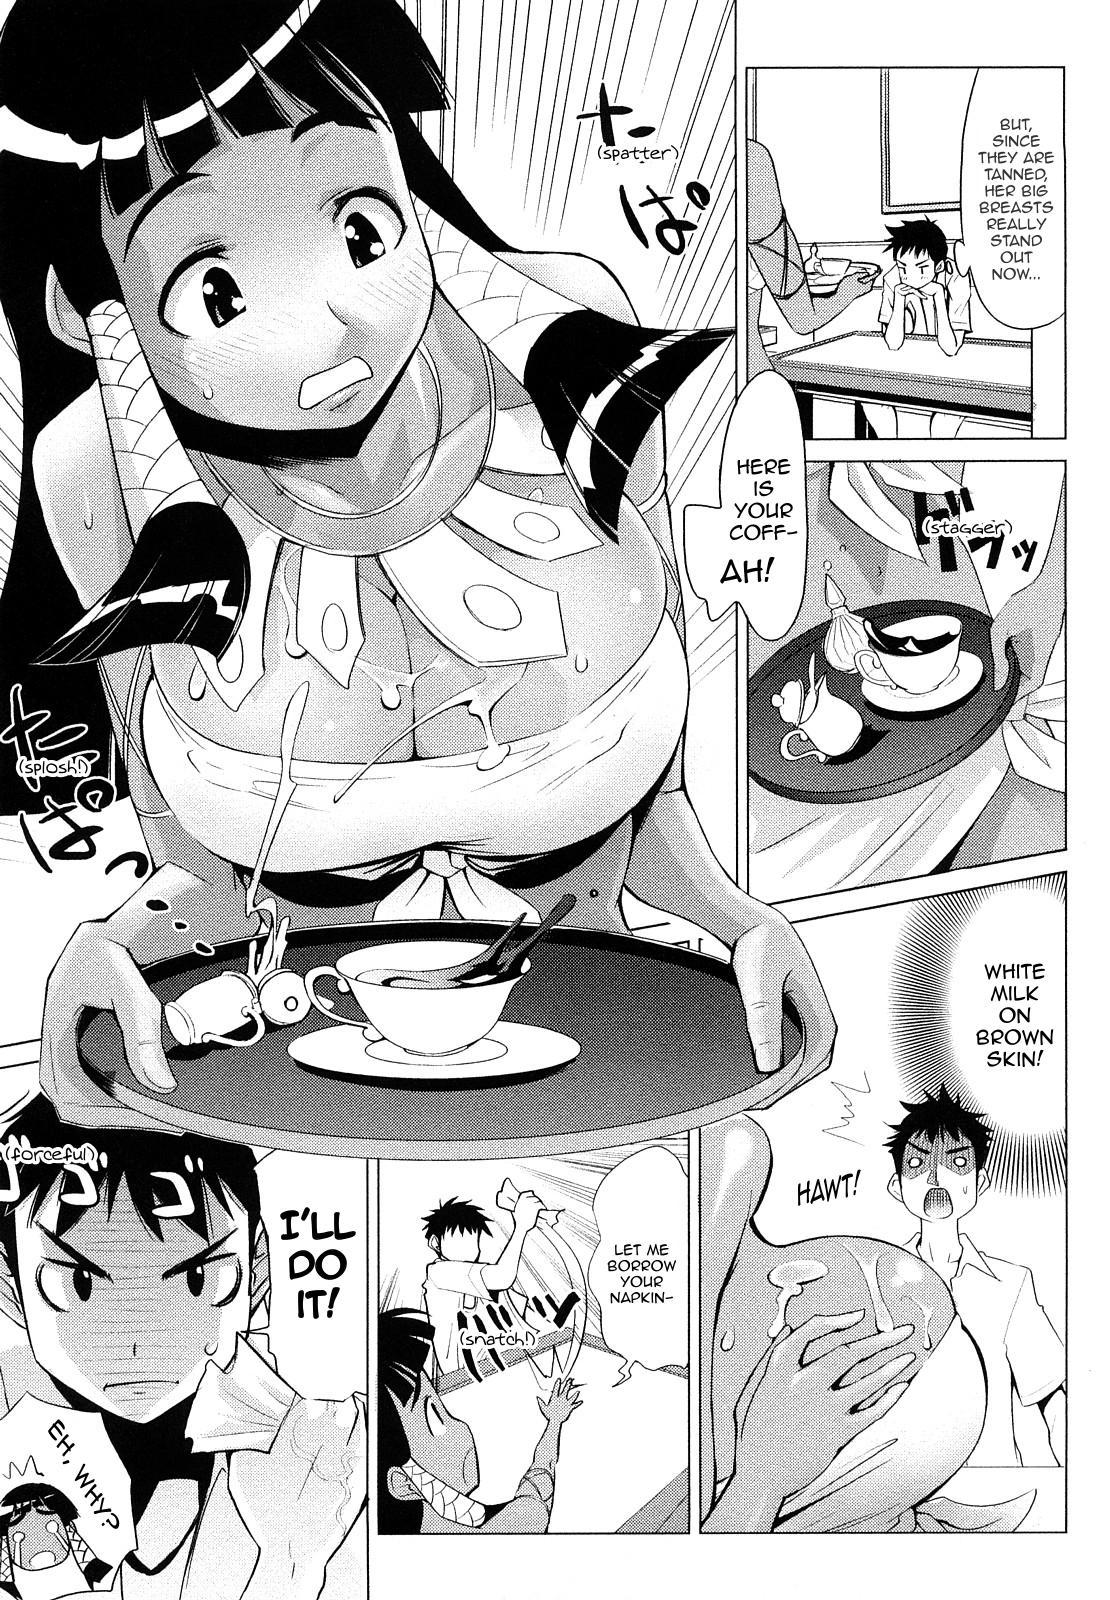 Shaking Natsuiro Oppai Cafe | Summer-Tanned Breasts Cafe Cuzinho - Page 5